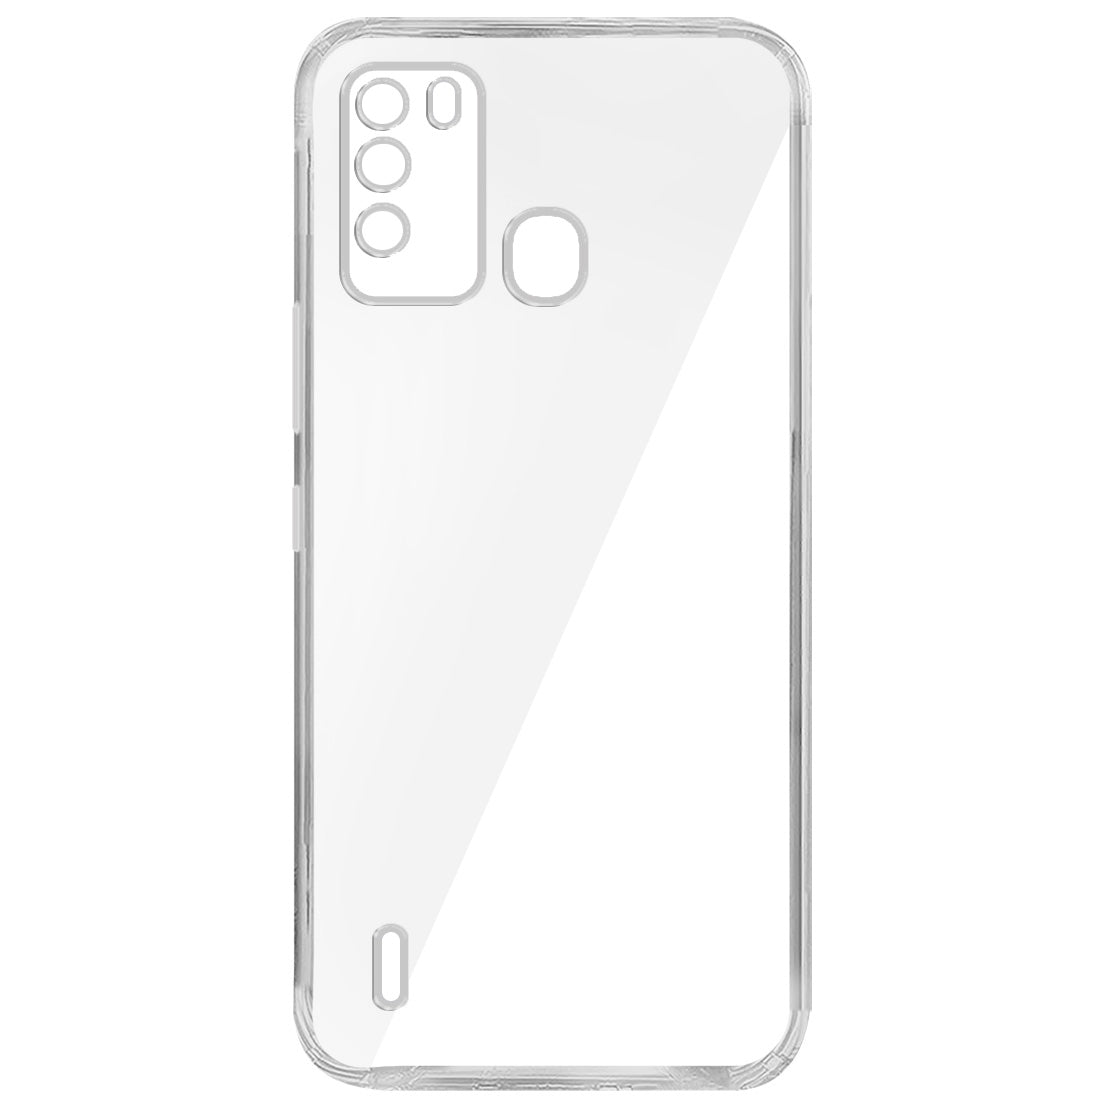 Clear Case for Itel Vision 1 Pro